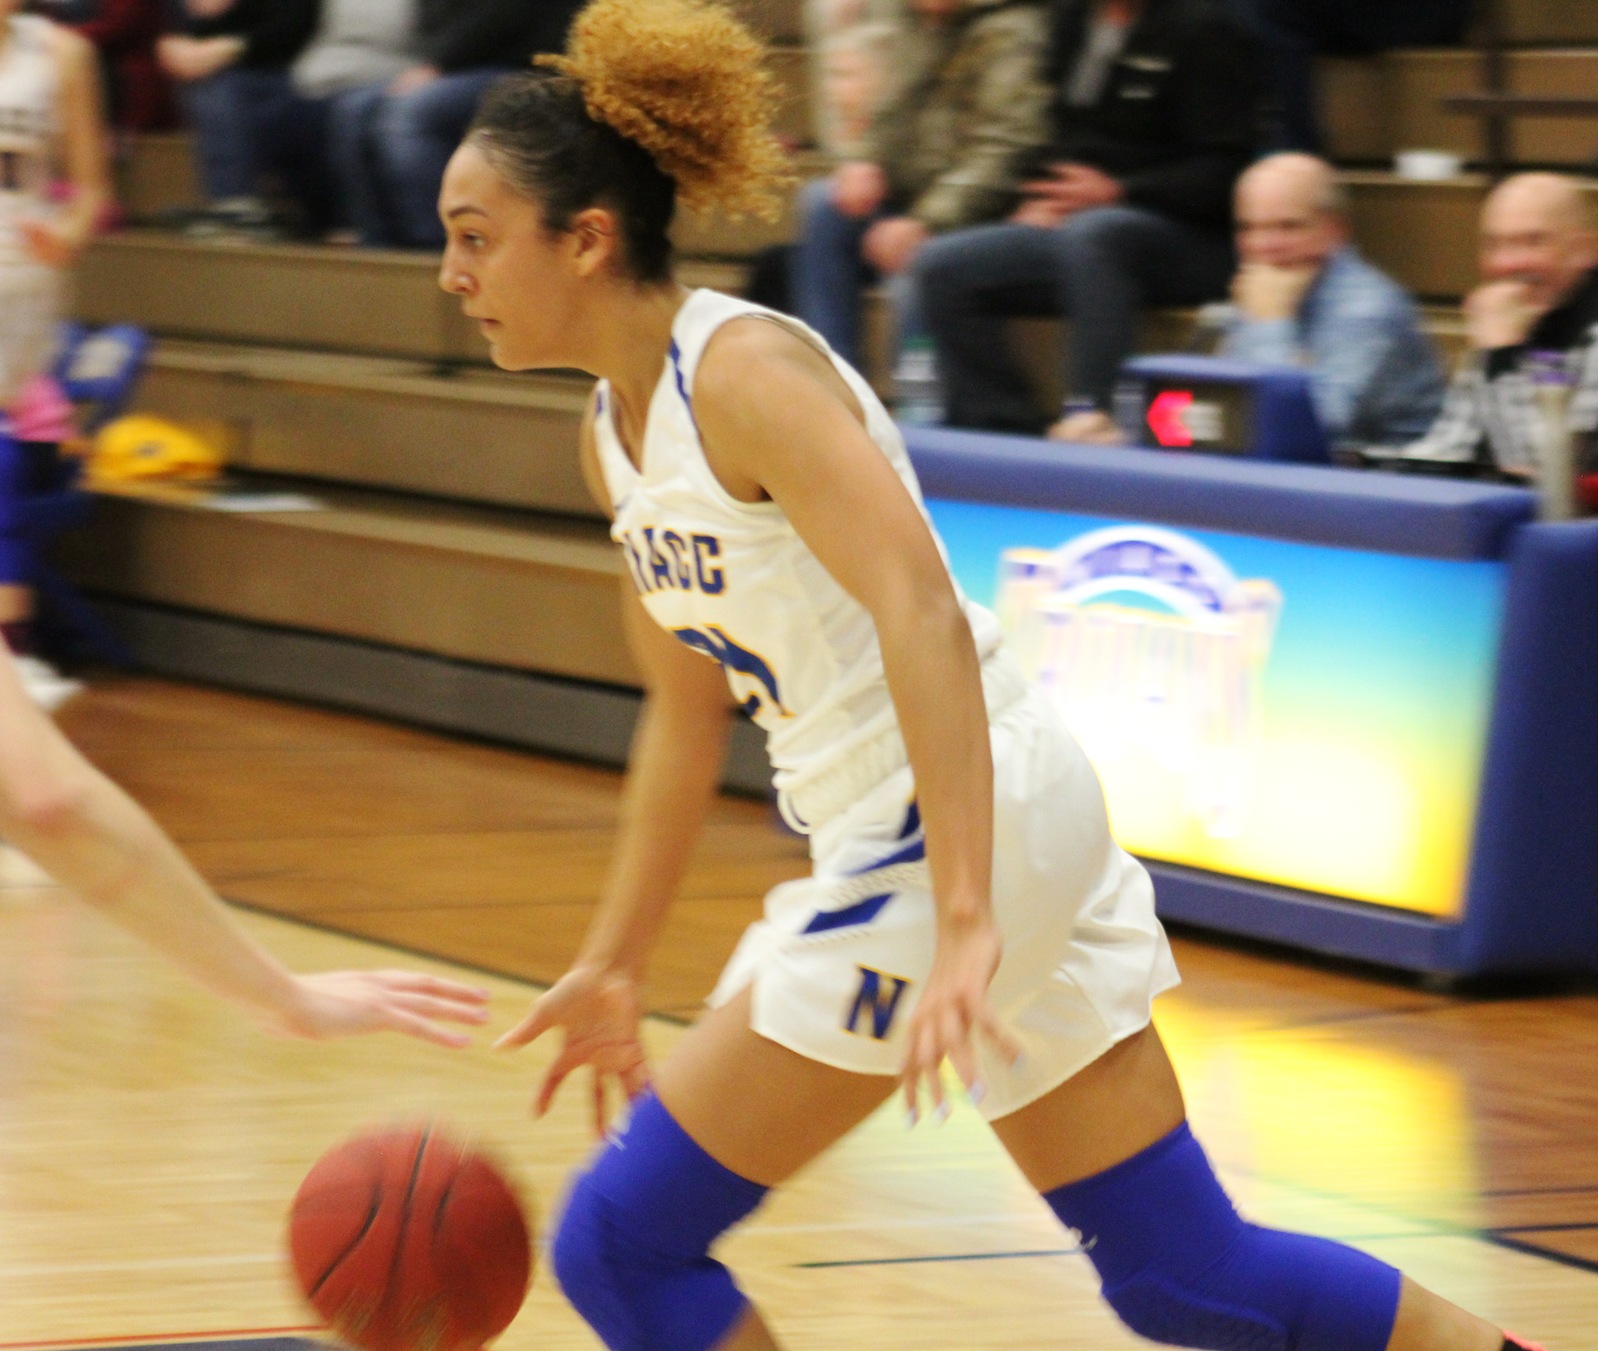 NIACC's Laker Ward drives to the basket during last week's home game against No. 2 Kirkwood.